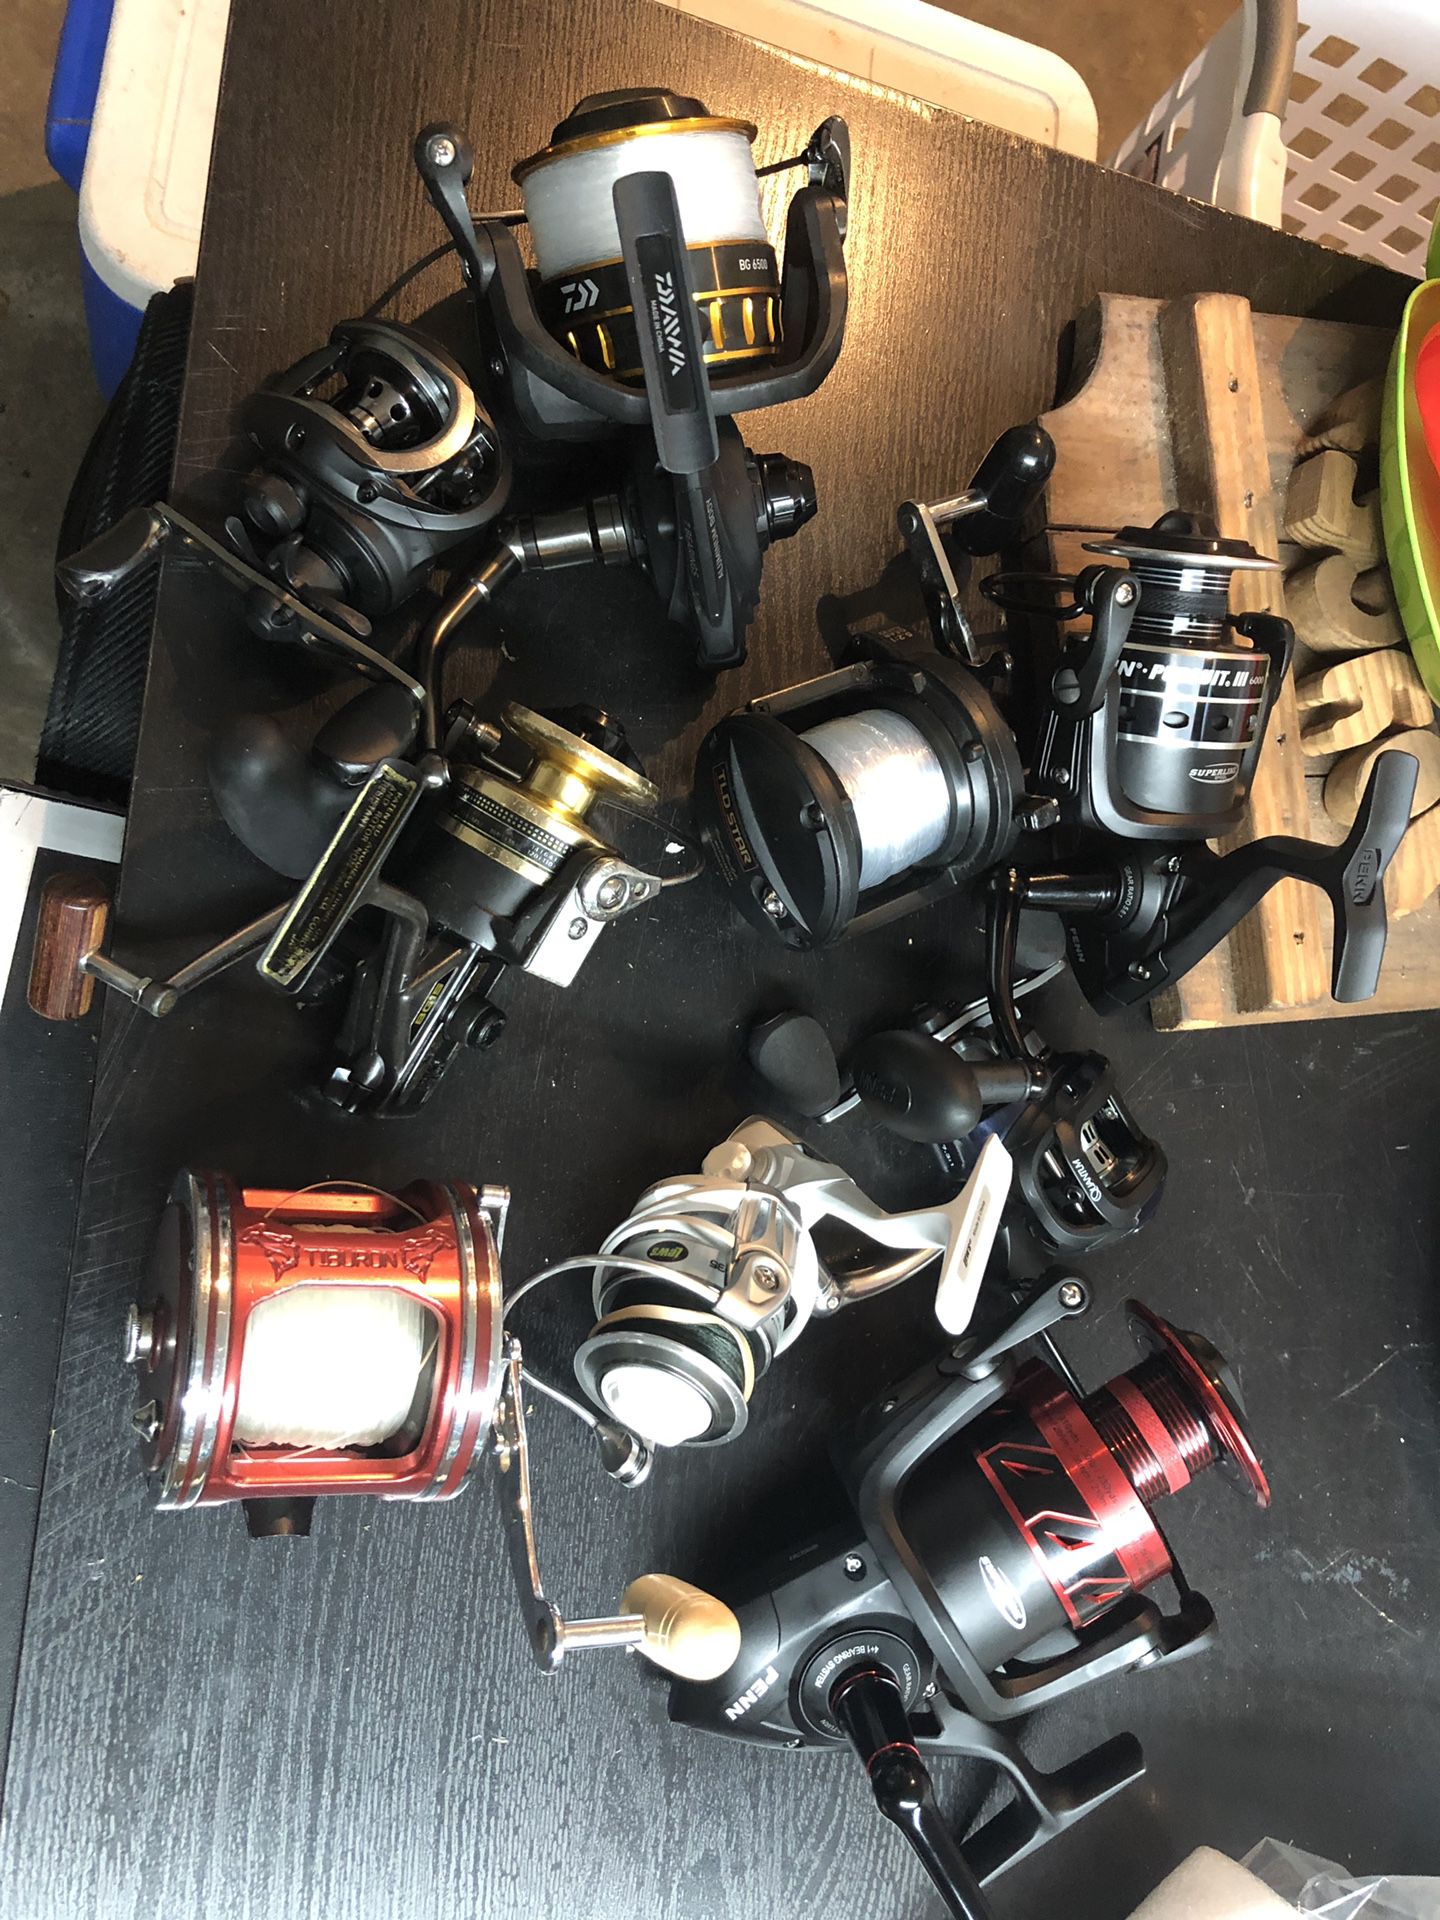 Fishing reels. Some brand new! Please read ad for pricing